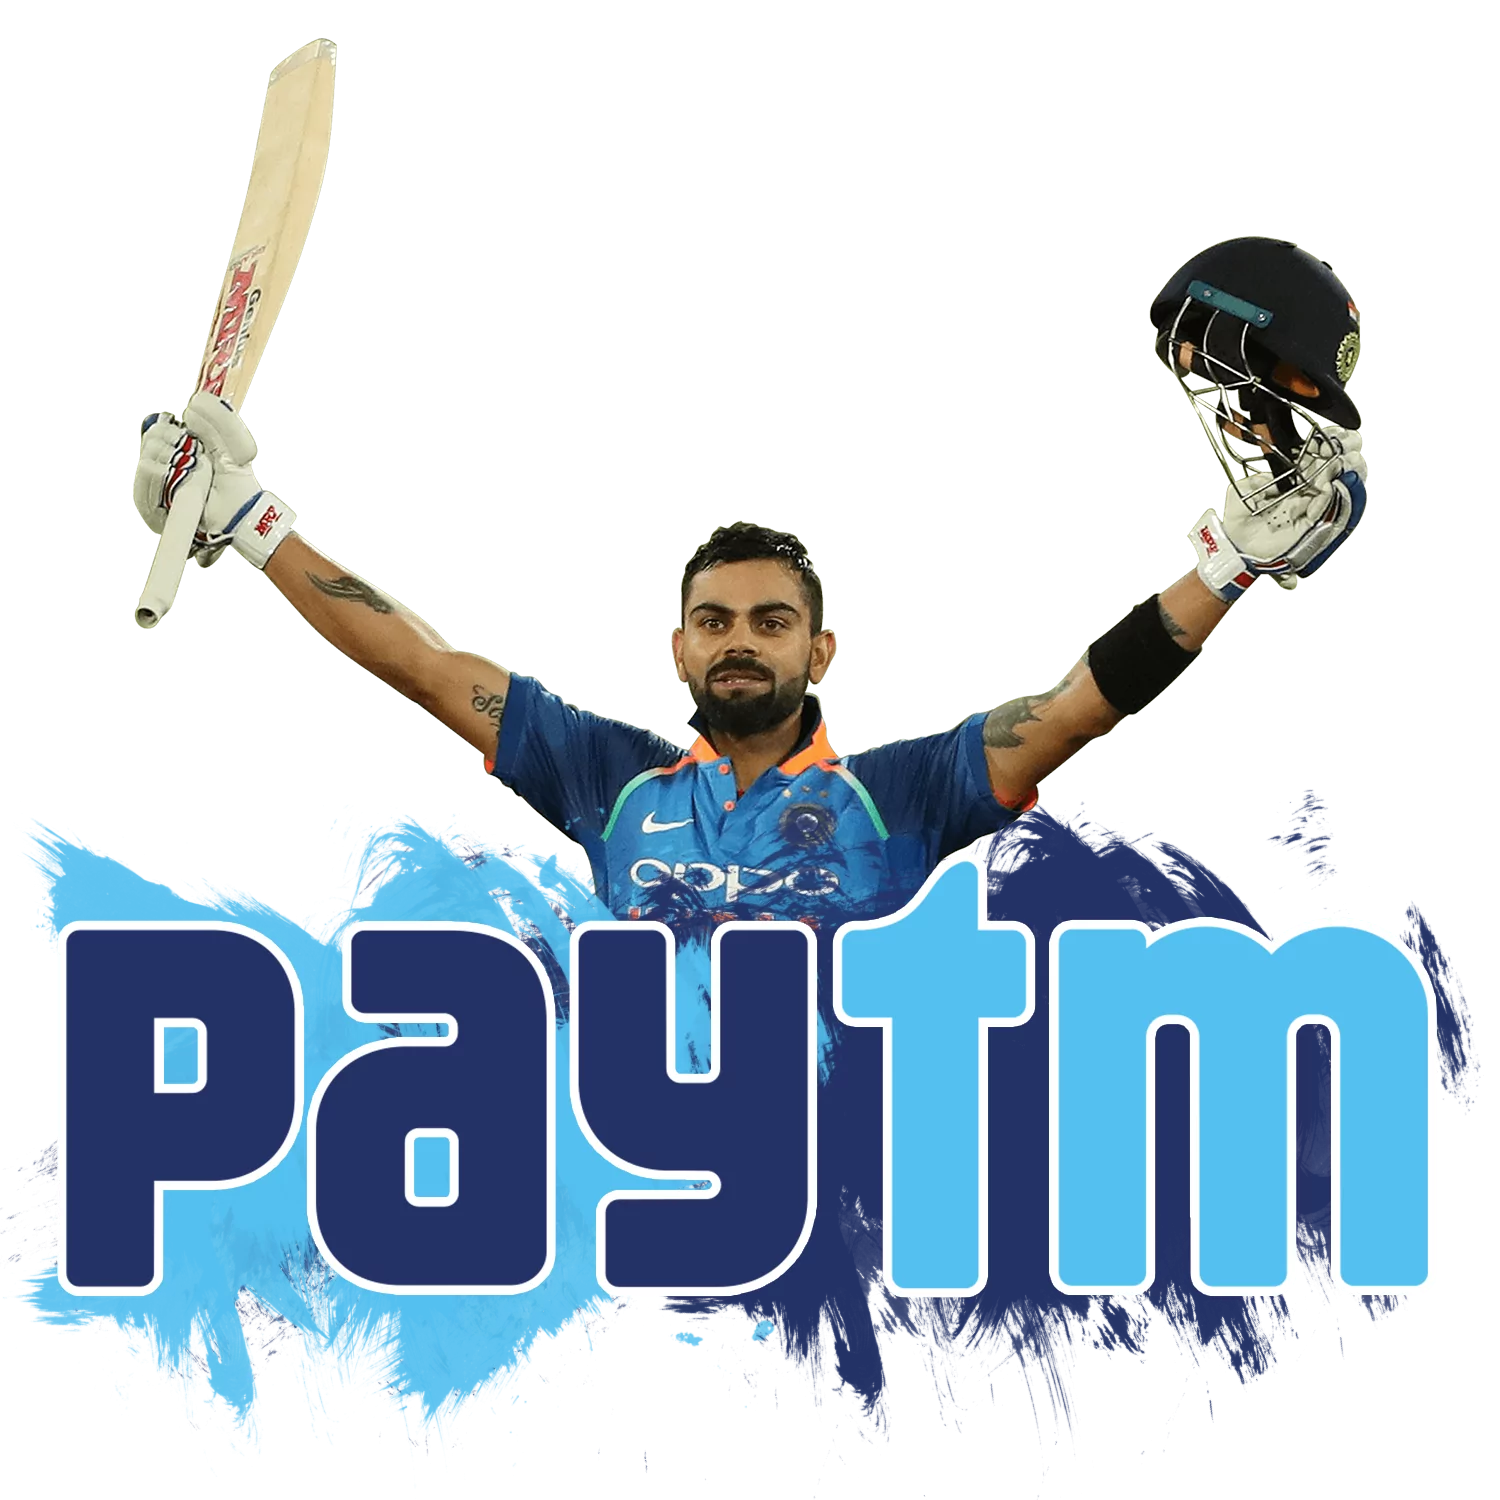 Download Paytm app and make instant deposits on cricket betting sites.